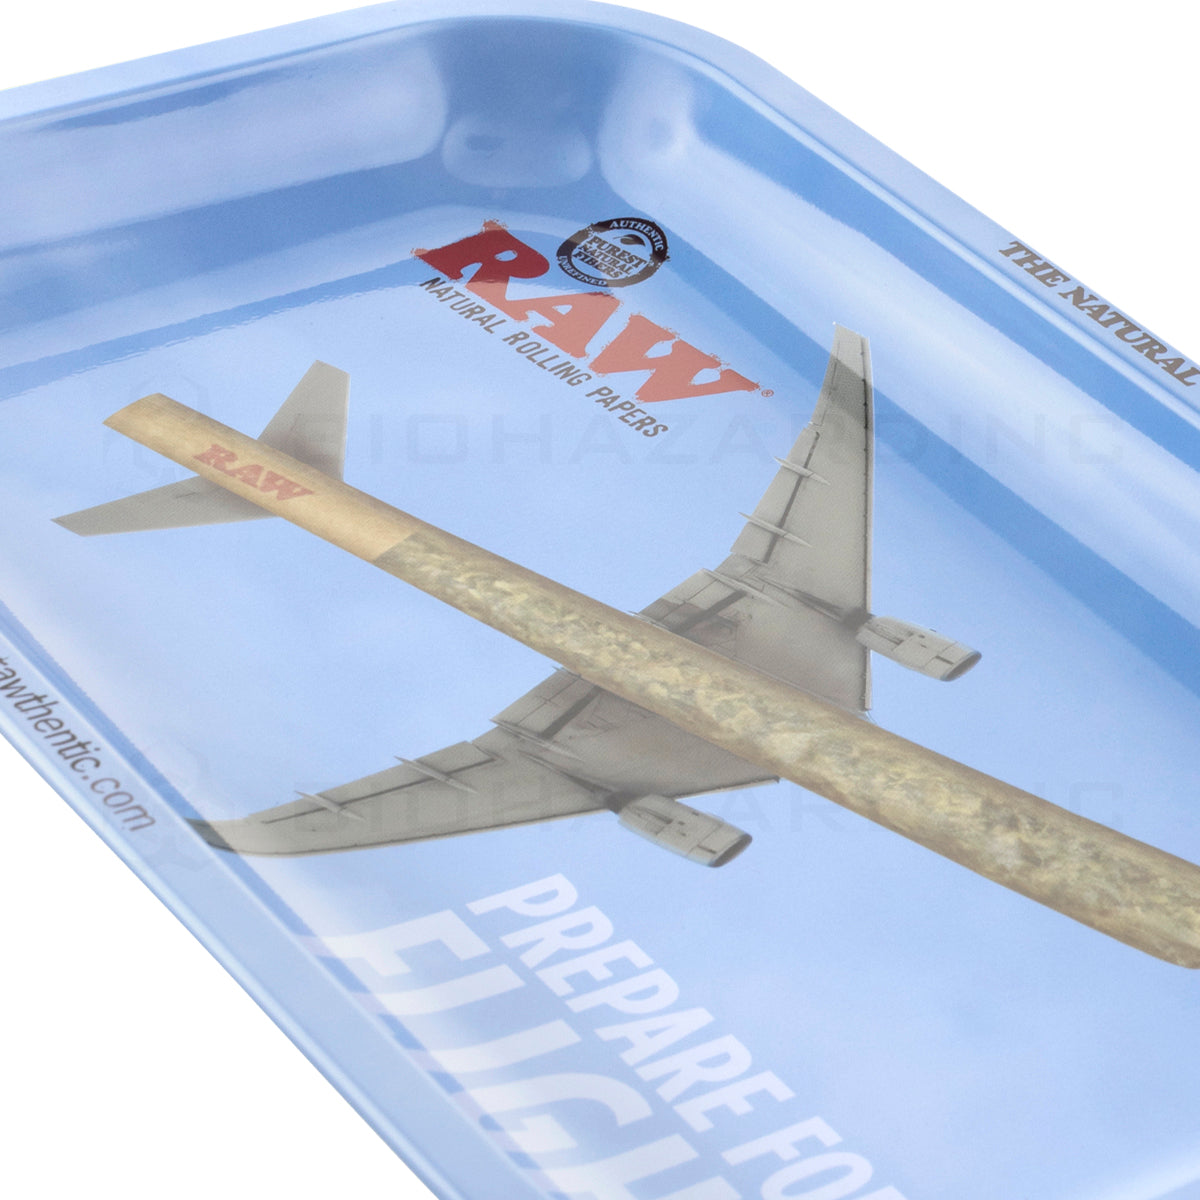 Raw® | Rolling Tray - Prepare for Flight | 11in x 7in - Small - Metal Rolling Tray Raw   